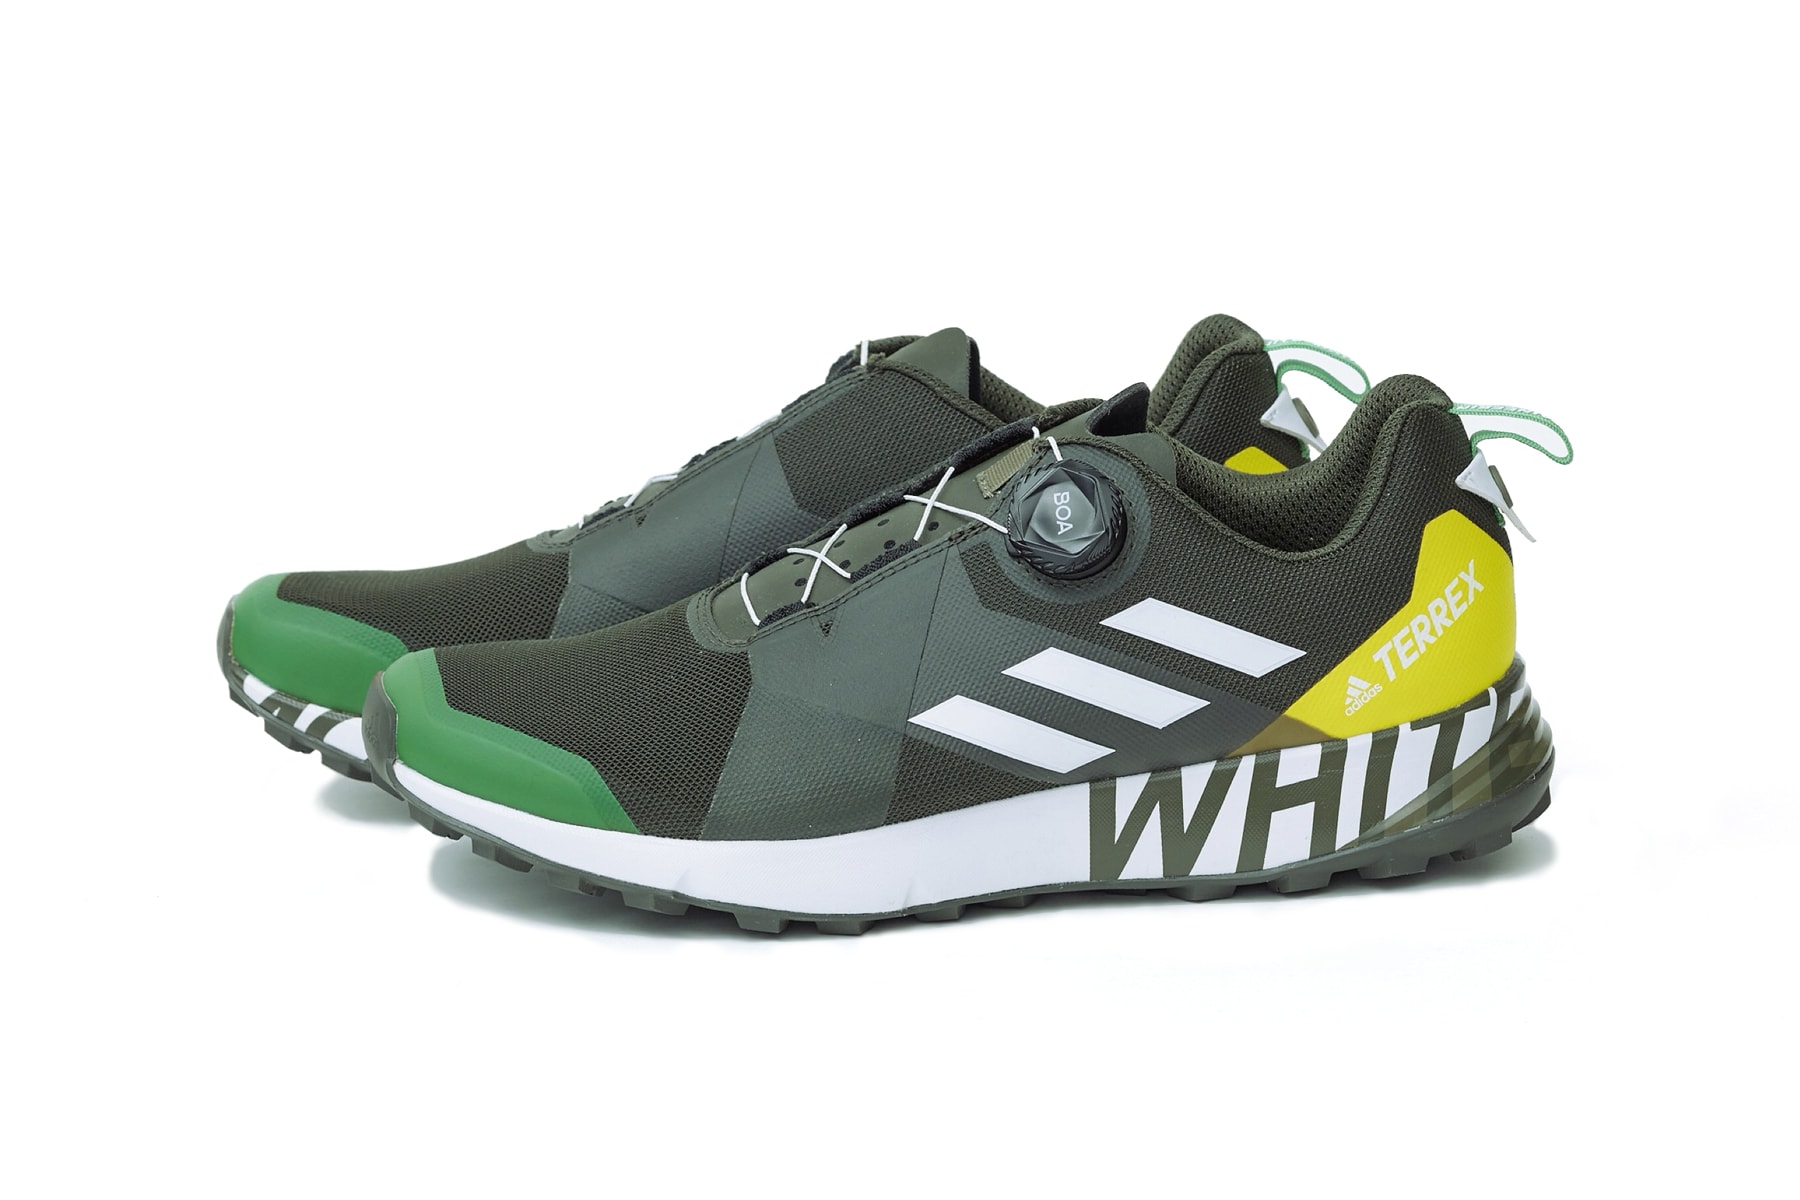 white mountaineering adidas terrex sneakers boa khaki green black white branding logo boa system lace trail shoe drop release date collaboration fall winter 2018 collection august 11 2018 japan web store purchase sale sell debut